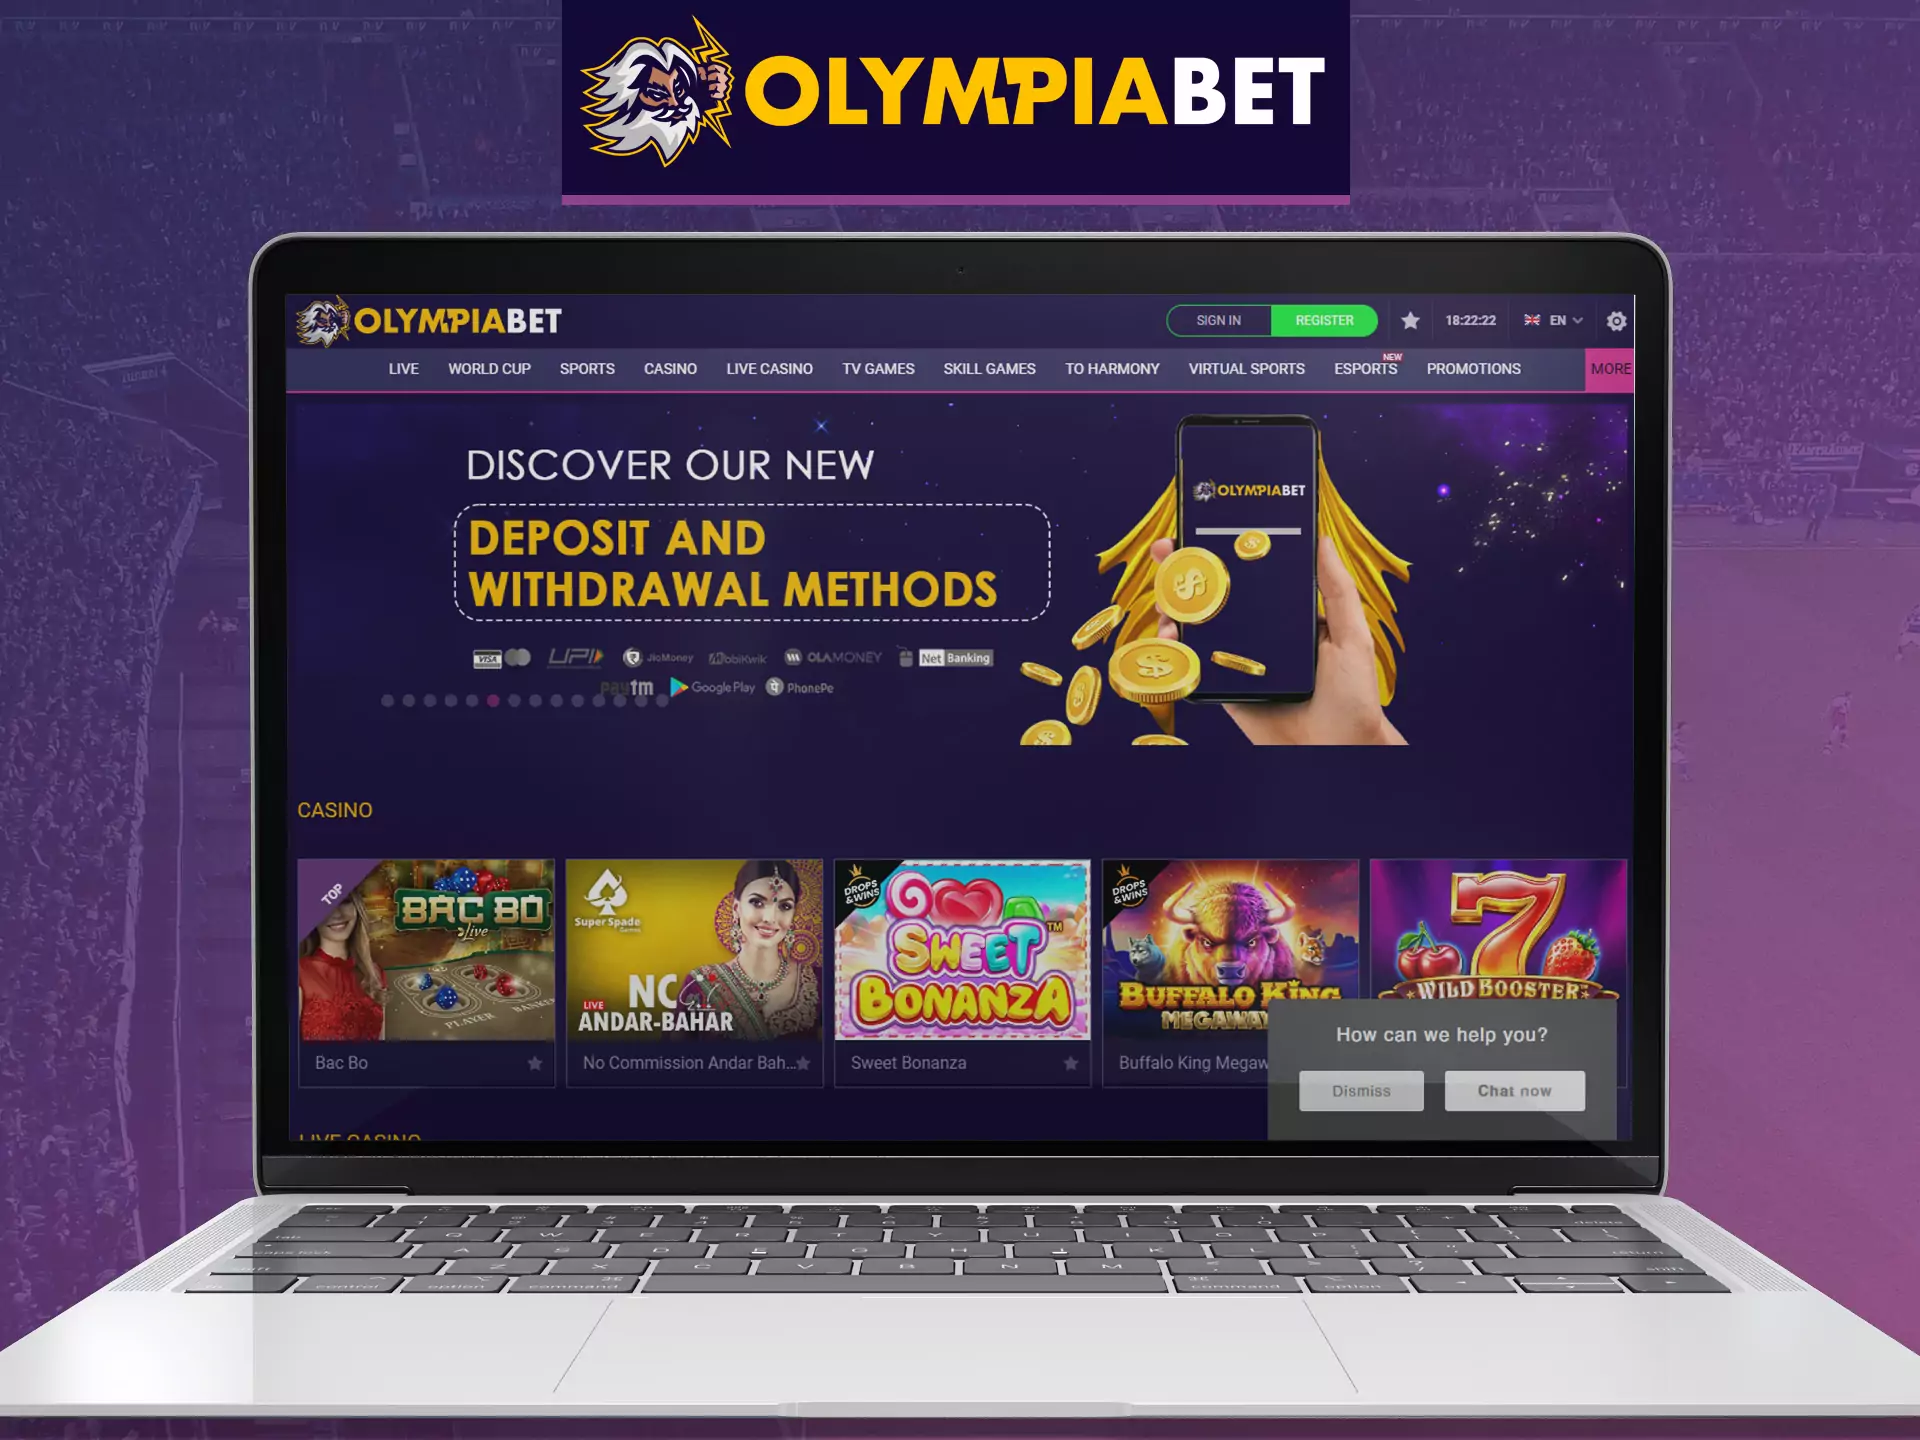 The official website of OlympiaBet offers convenient use and access to all functions and bonuses.